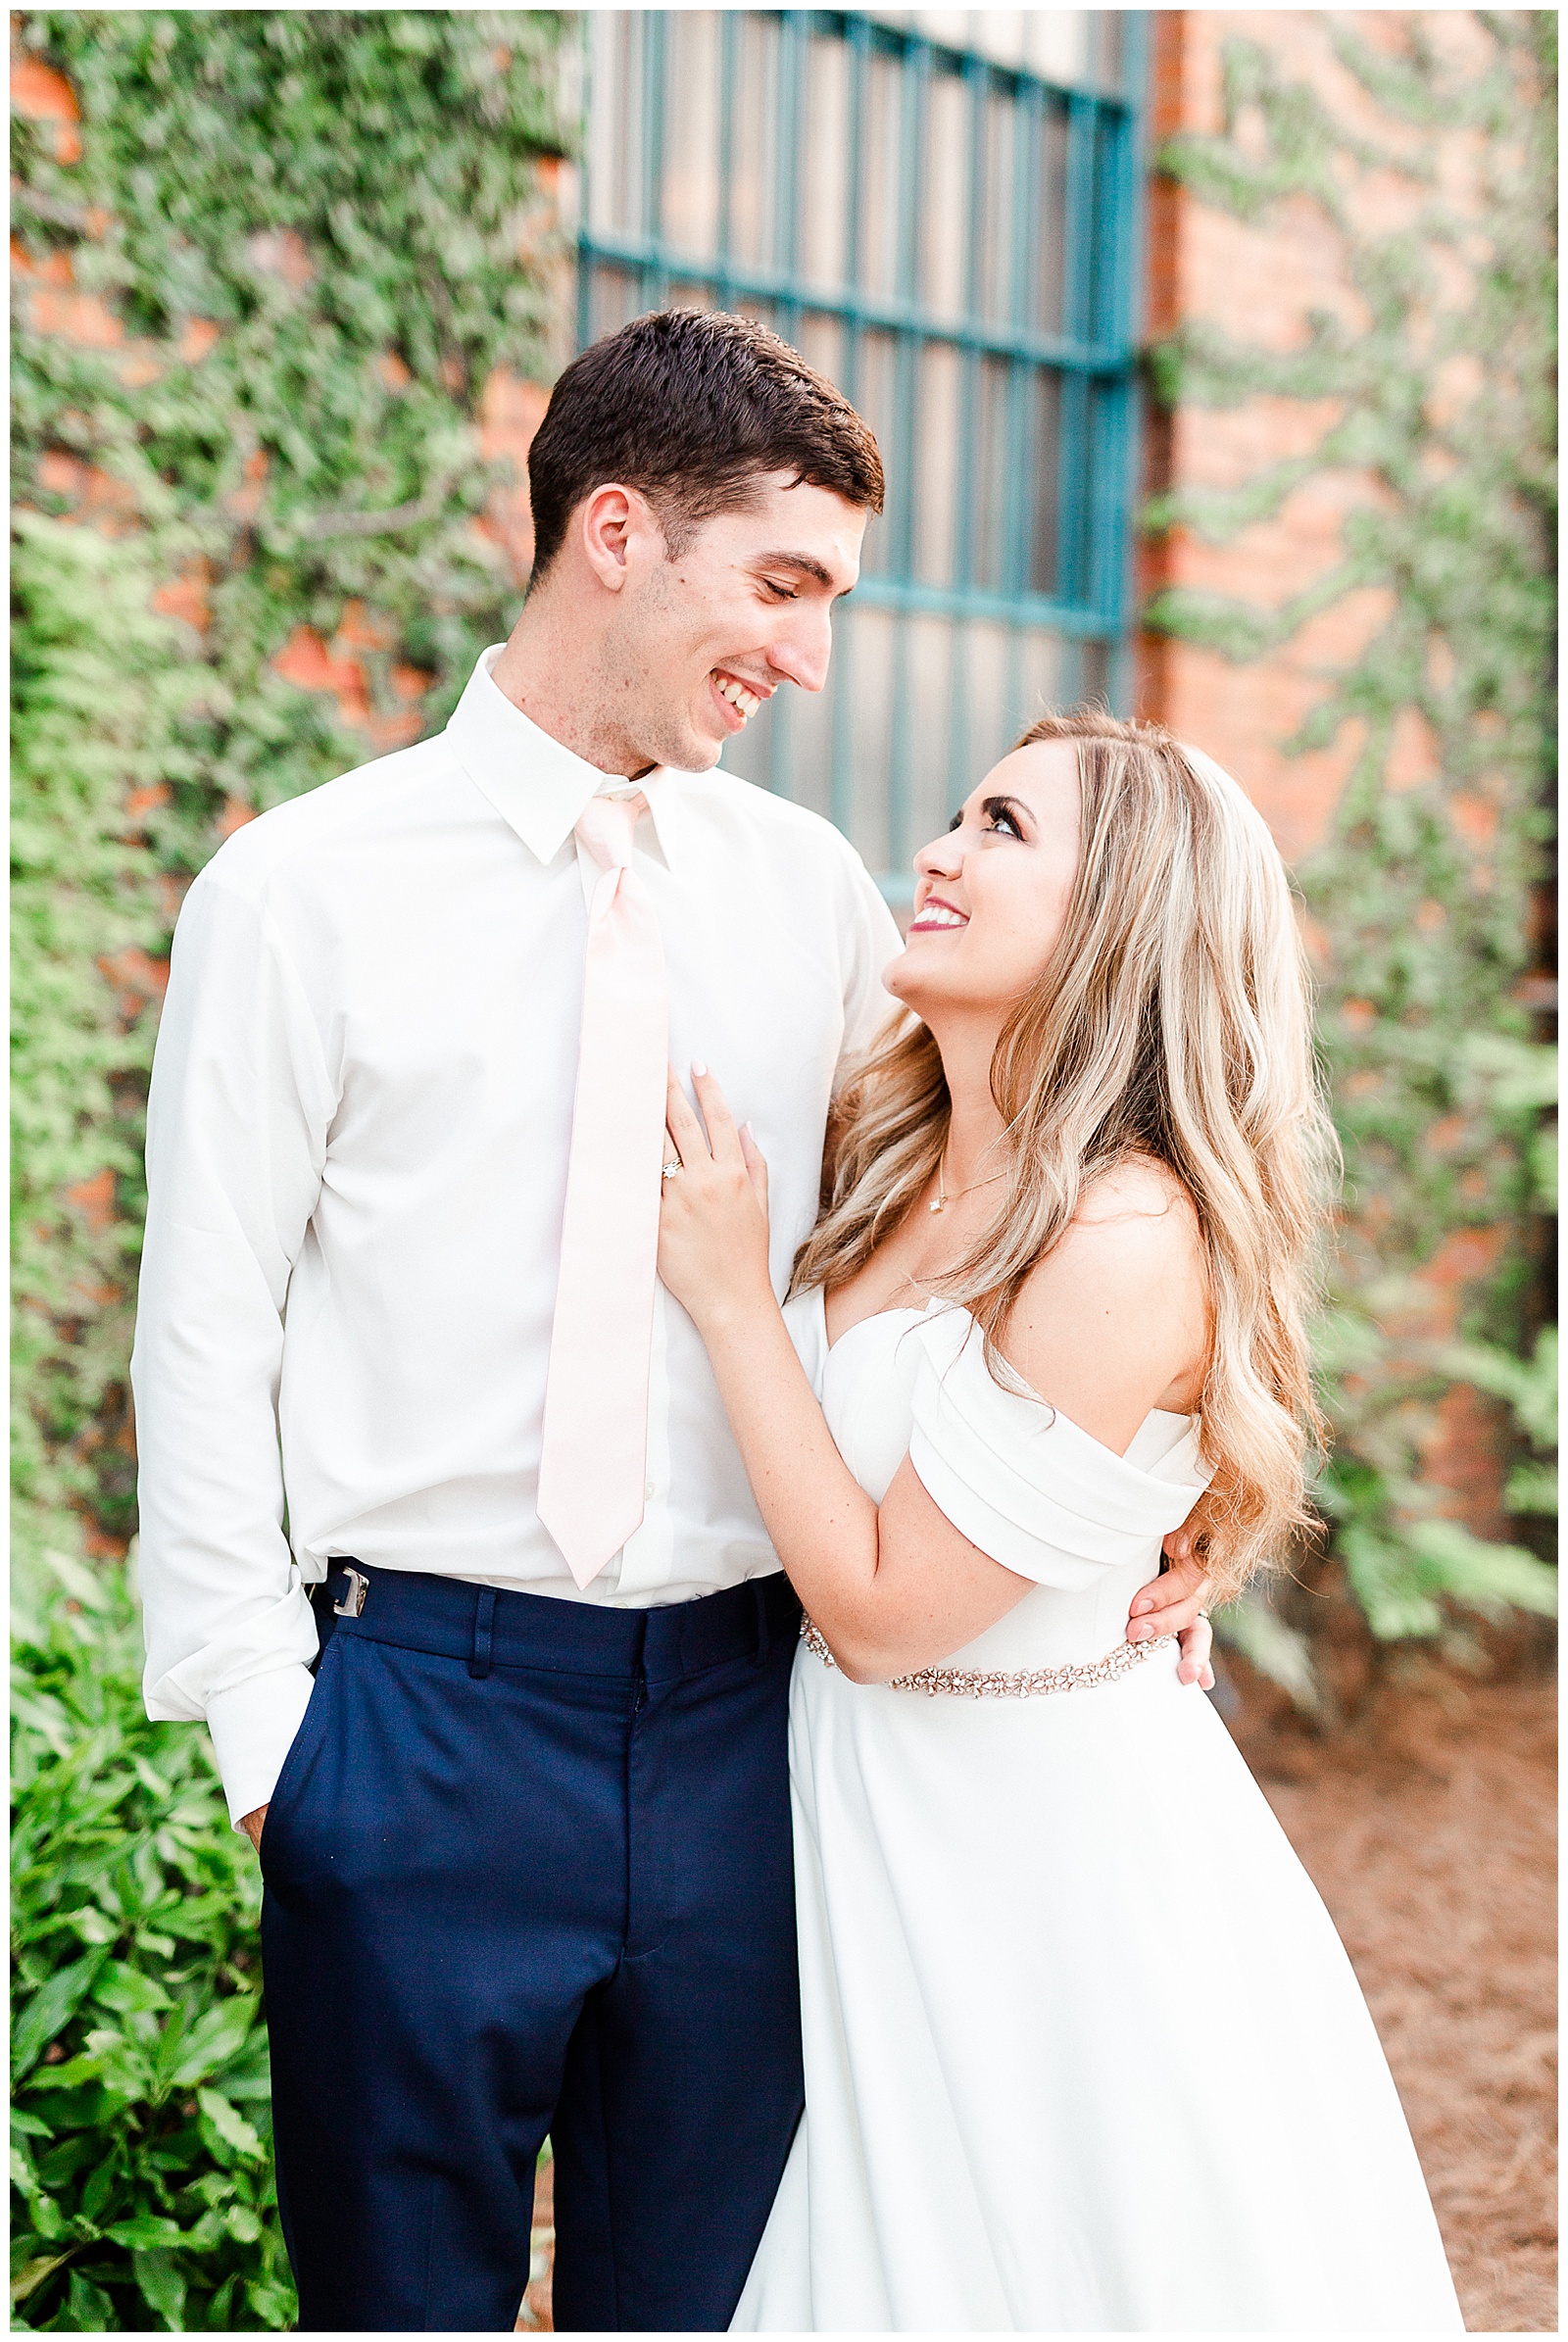 Stunning Modern Bride and Groom with off shoulder wedding dress and blue suit in outdoor portraits in front of vine-covered brick building from Summer Wedding in Charlotte, NC | Check out the full wedding at KevynDixonPhoto.com